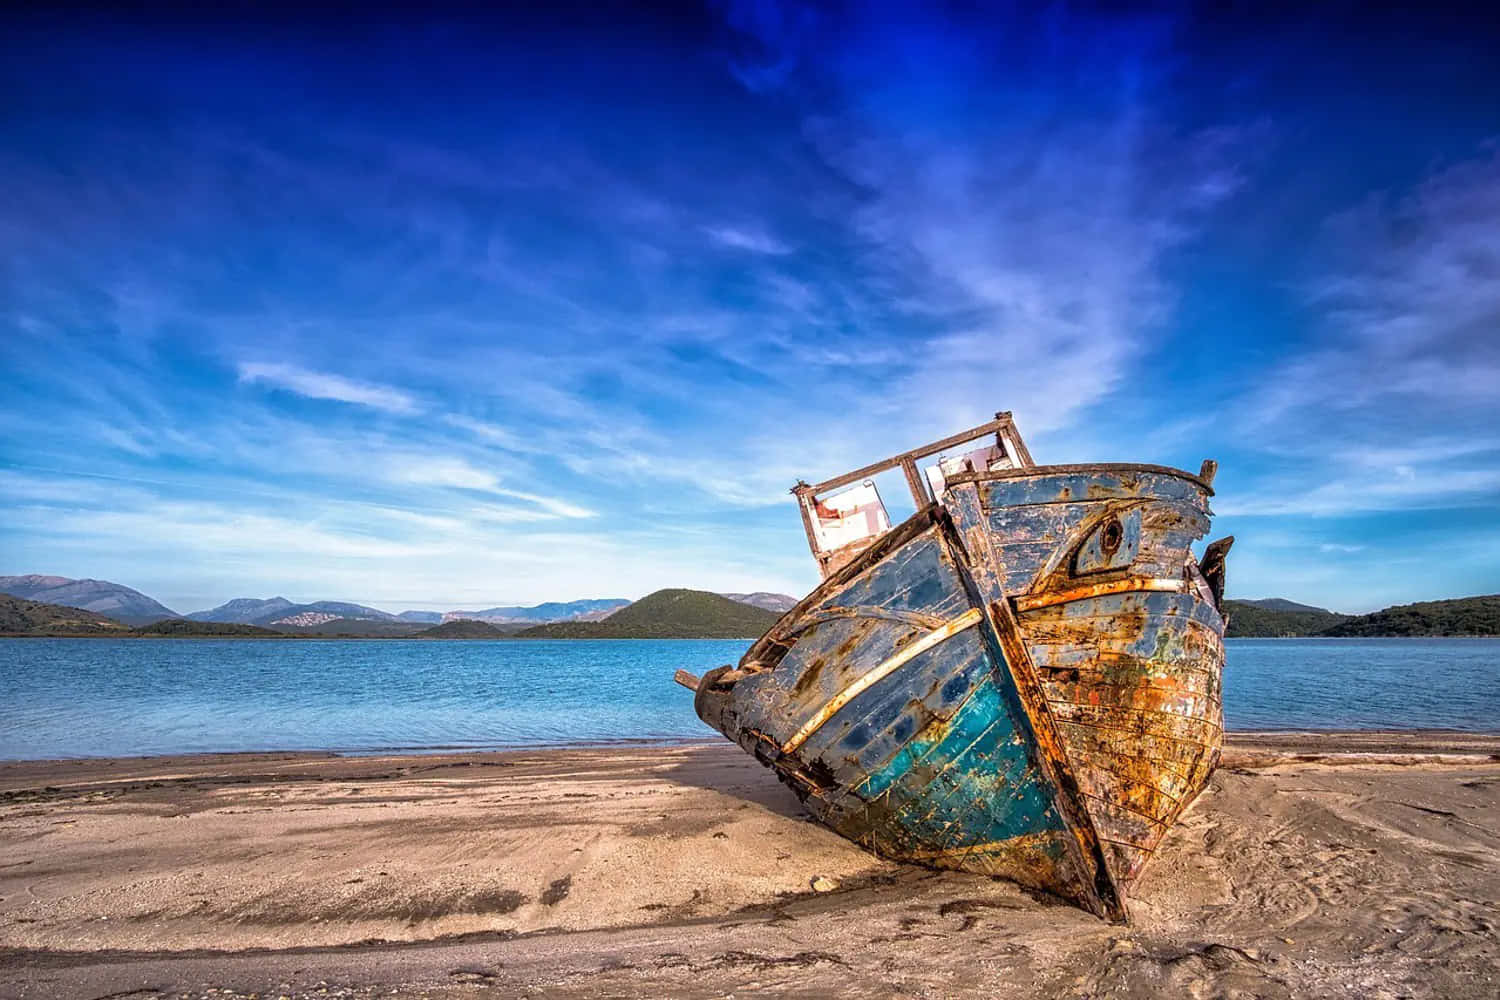 The Aging Beauty of Isolation - A Rusty Boat Stranded Ashore Wallpaper